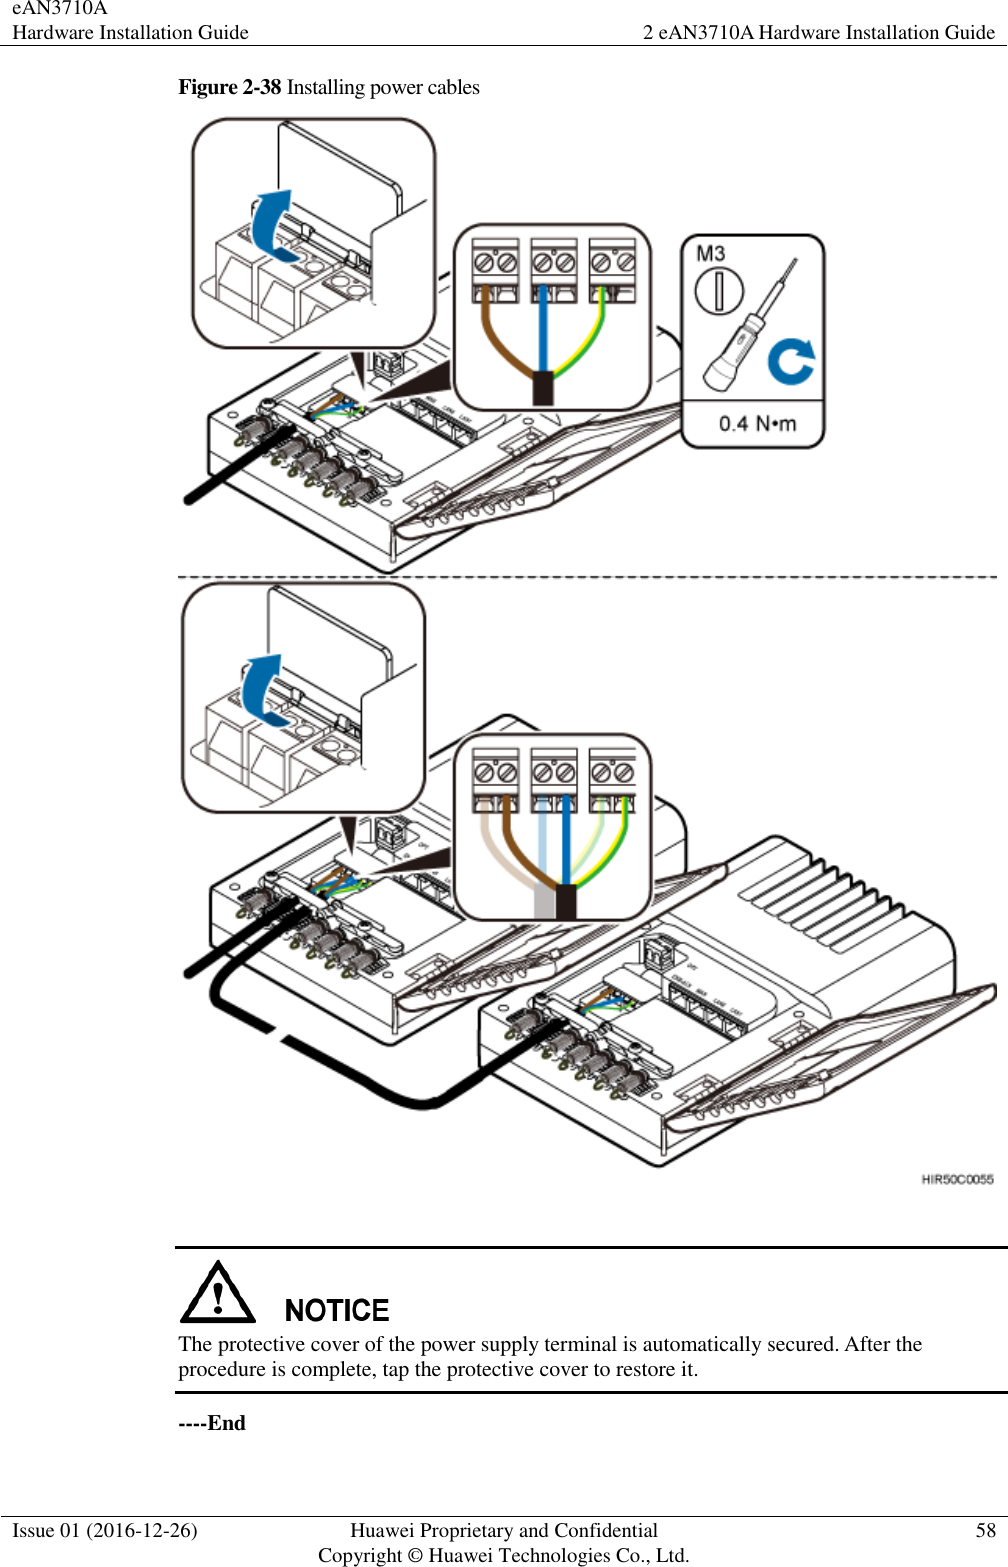 eAN3710A Hardware Installation Guide 2 eAN3710A Hardware Installation Guide  Issue 01 (2016-12-26) Huawei Proprietary and Confidential                                     Copyright © Huawei Technologies Co., Ltd. 58  Figure 2-38 Installing power cables    The protective cover of the power supply terminal is automatically secured. After the procedure is complete, tap the protective cover to restore it. ----End 